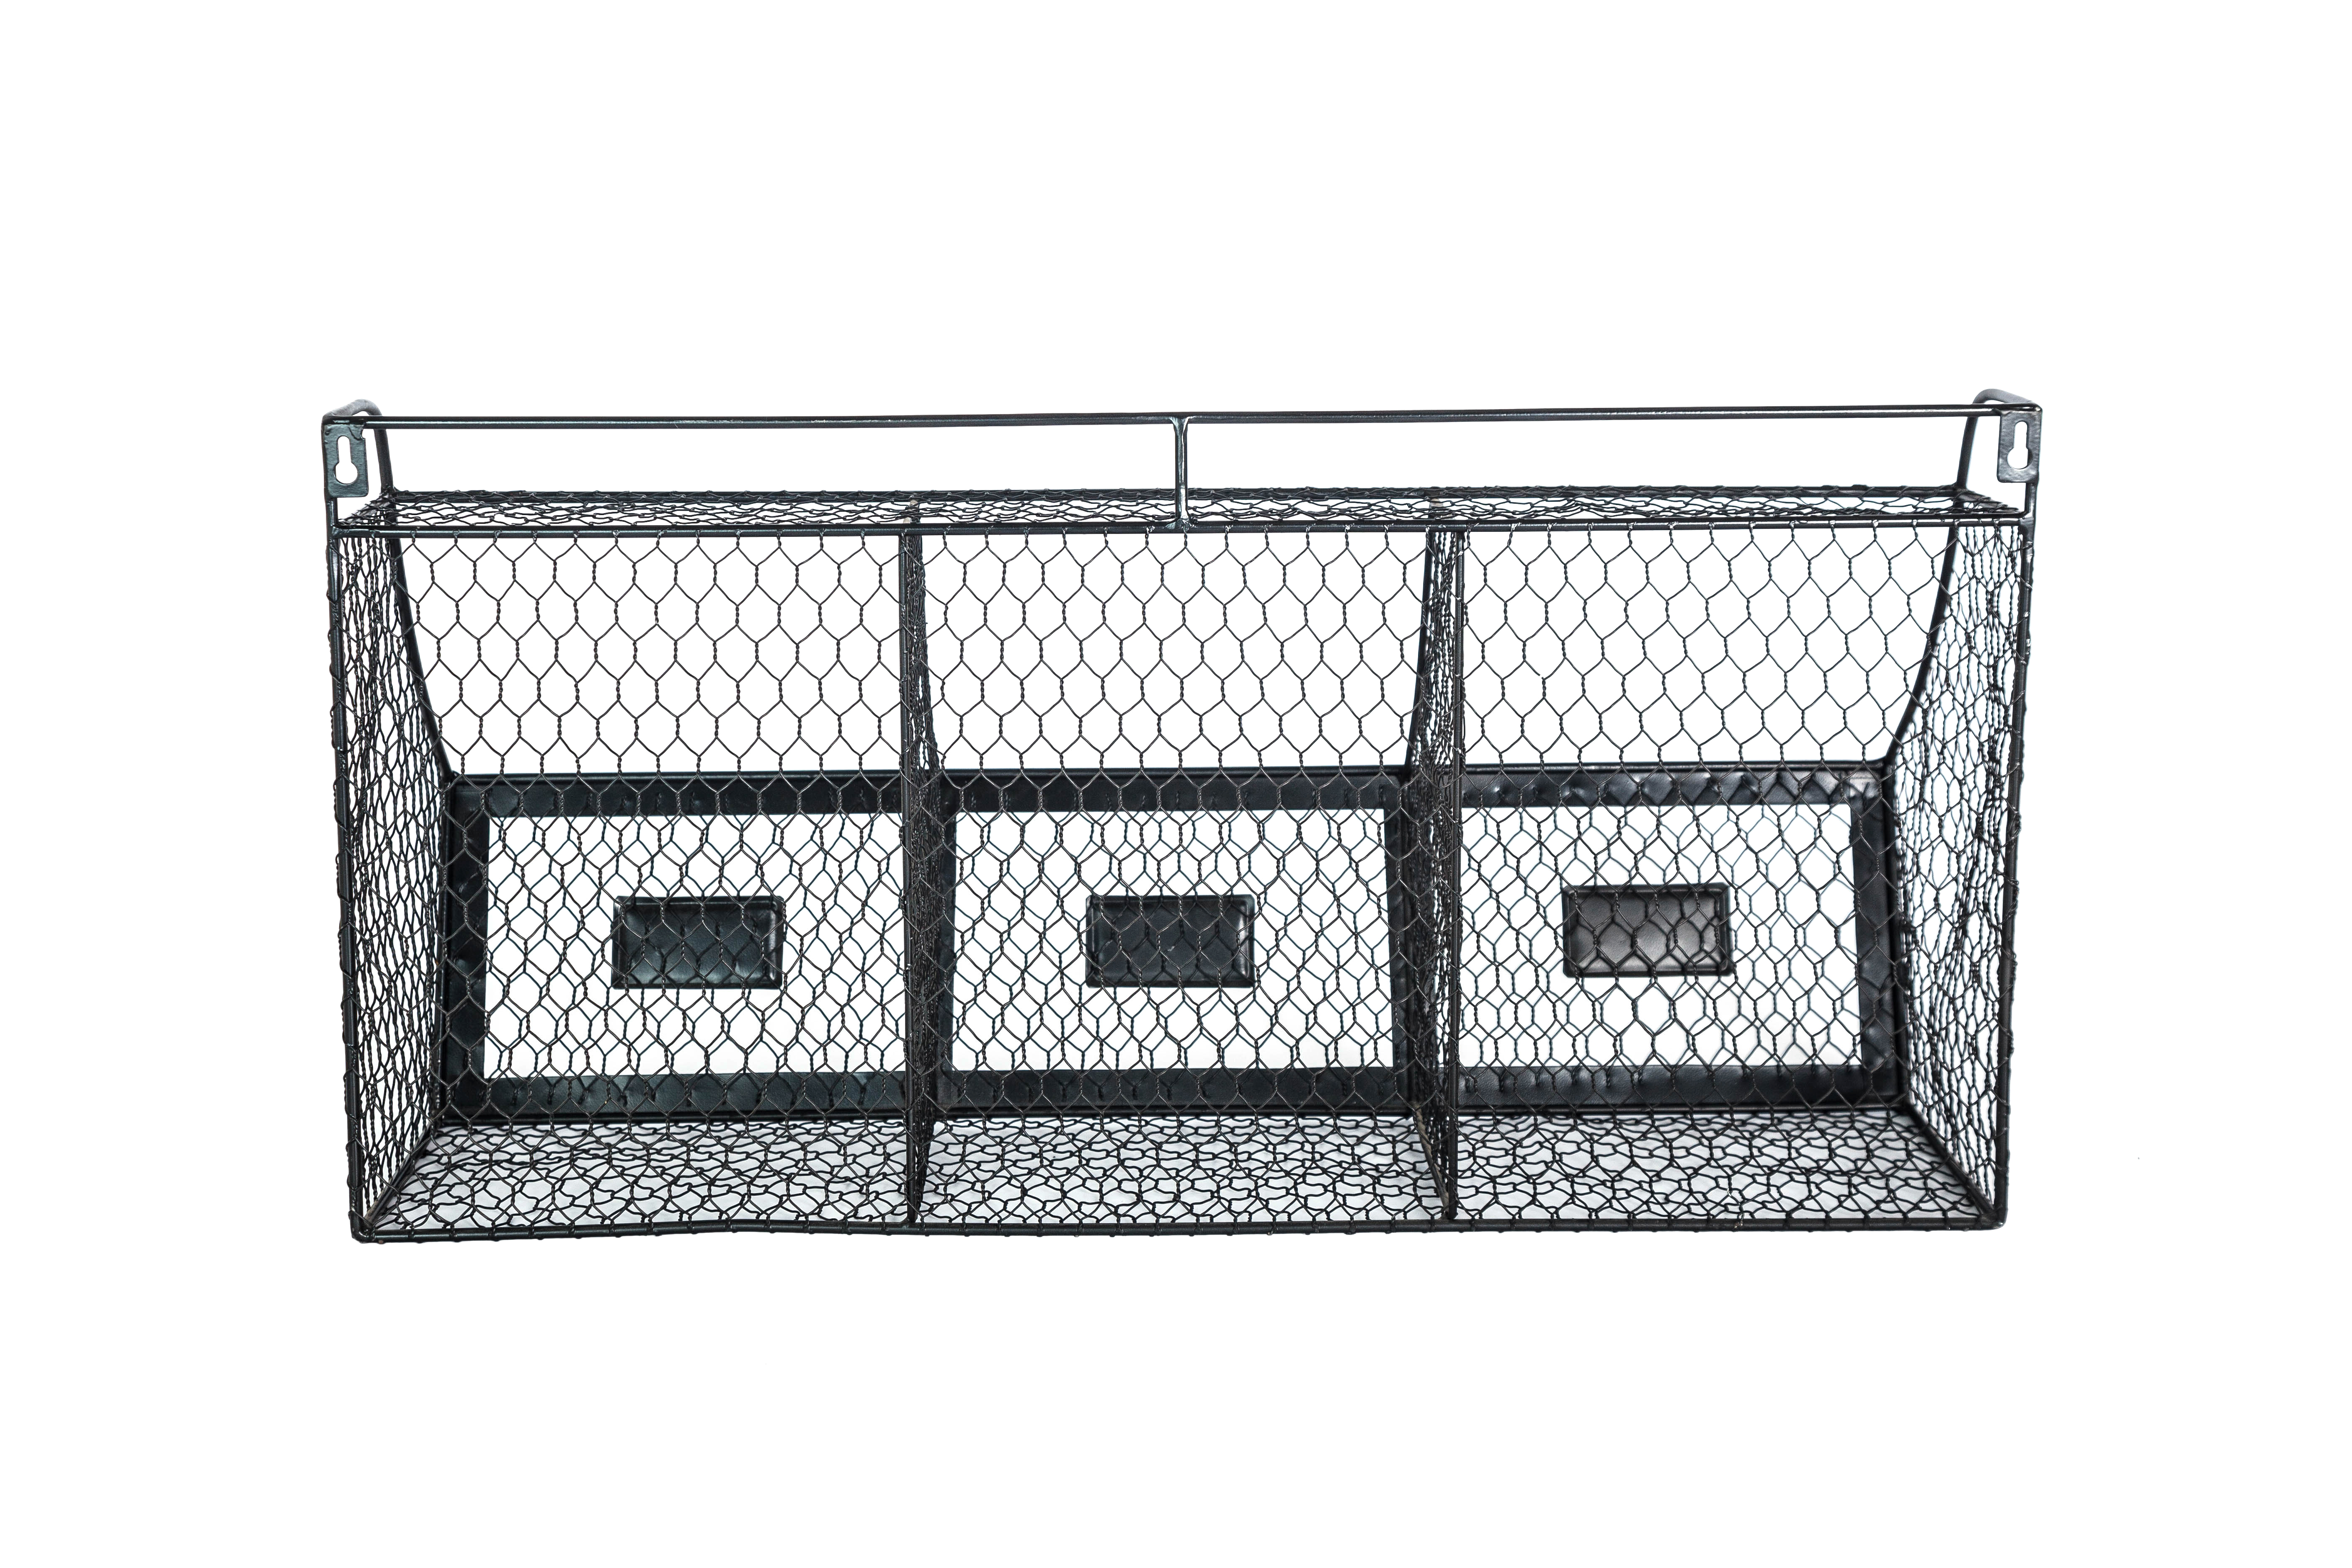 K-Cliffs 3 Compartment Basket, Large Wall Mount Metal Storage Hanging Fruit Organizer  Wire Baskets  Black Dimensions; 26x13x10 - image 4 of 5